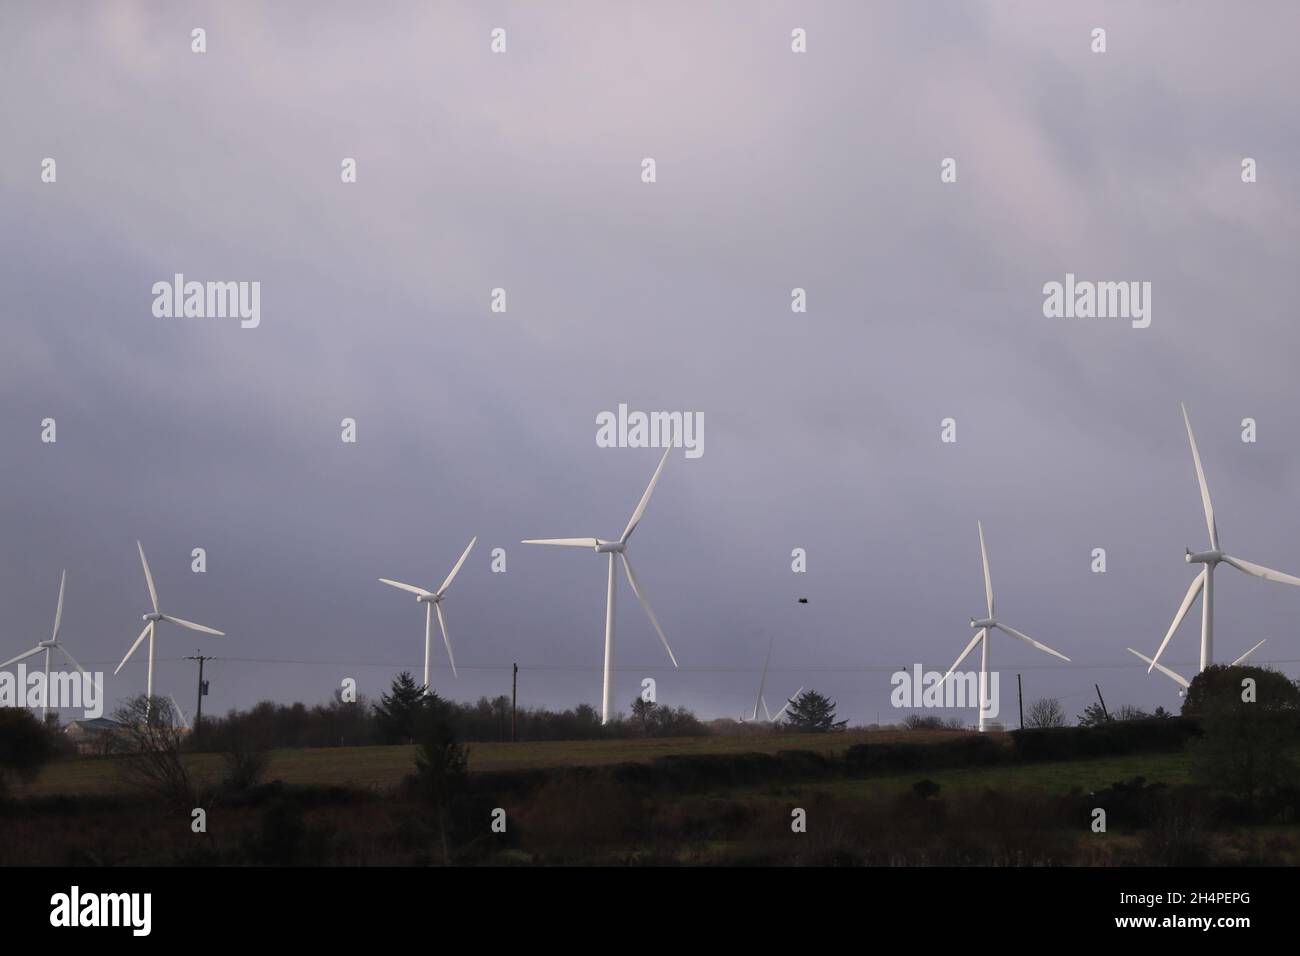 Wind turbines on farmland in Co. Derry, Northern Ireland.  To reduce carbon emissions the UK and governments are using wind and solar energy. Stock Photo